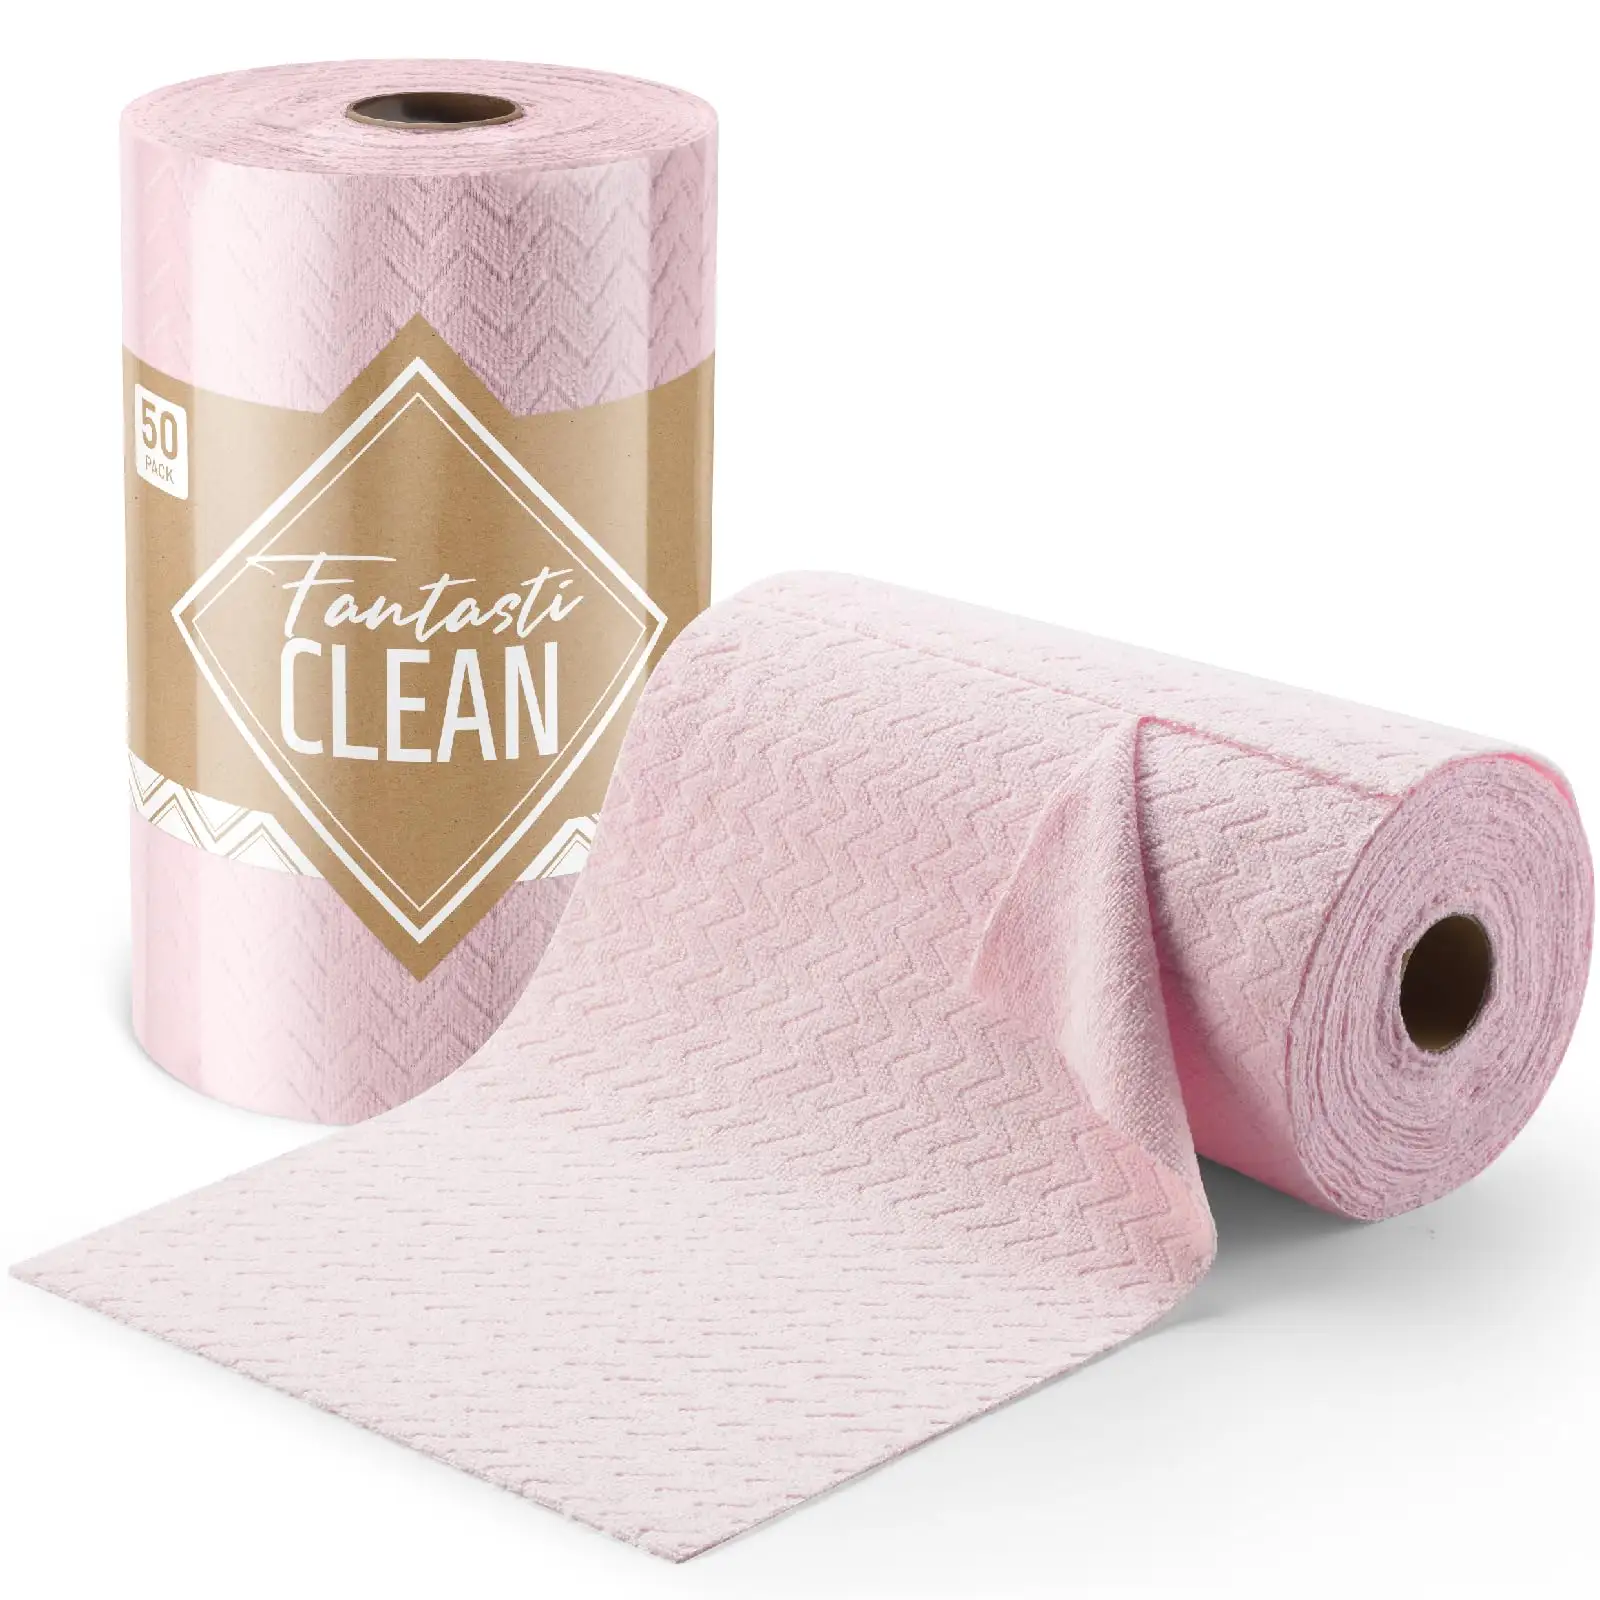 FantastiCLEAN 50 Pack 200gsm Tear Away Towels Microfiber Cleaning Cloth Roll, Reusable and Washable Cloths, for Car, House